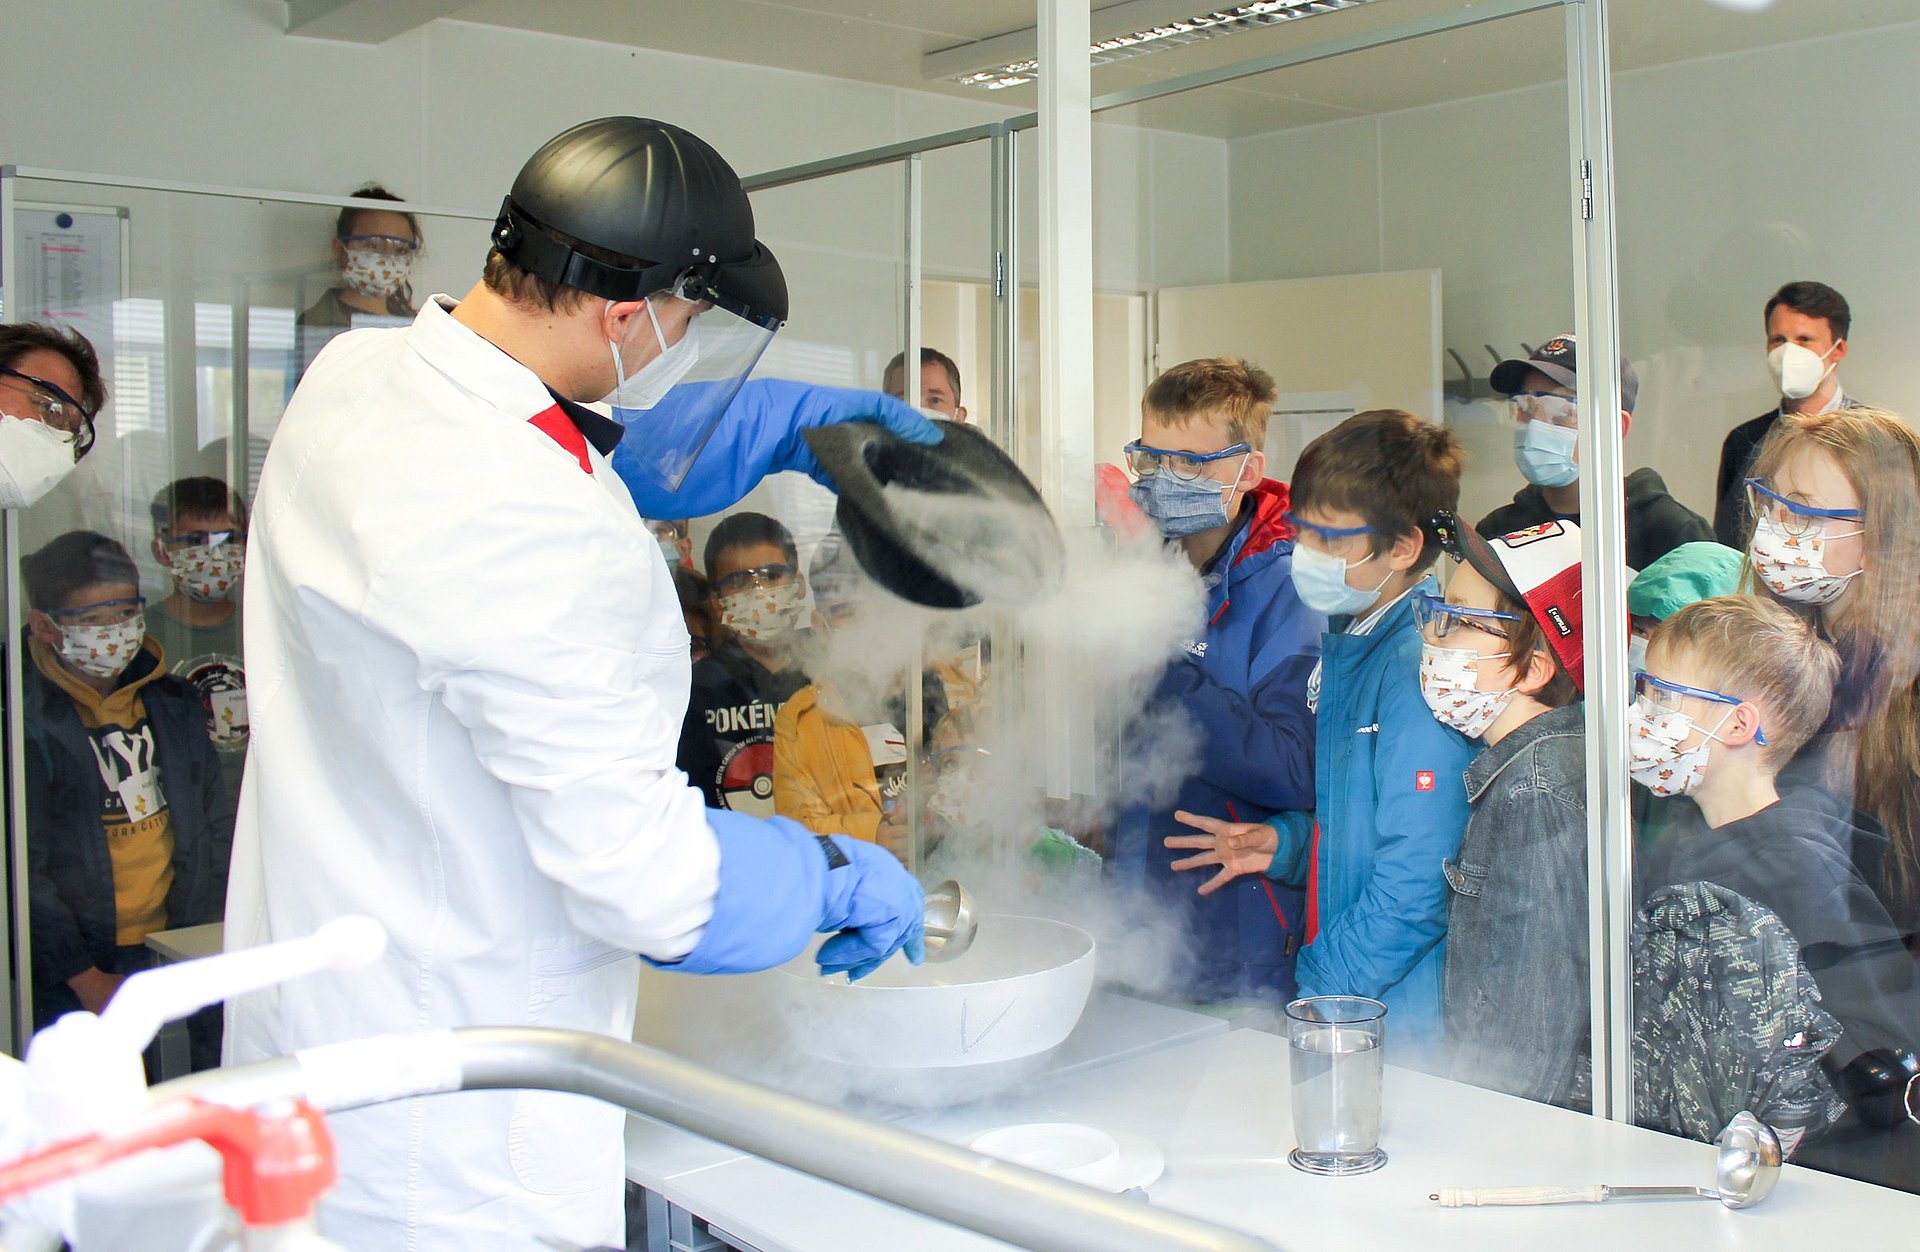 In the laboratory, PhD student Tobias Neuwirth makes ice cream using nitrogen under the attentive observation of children.